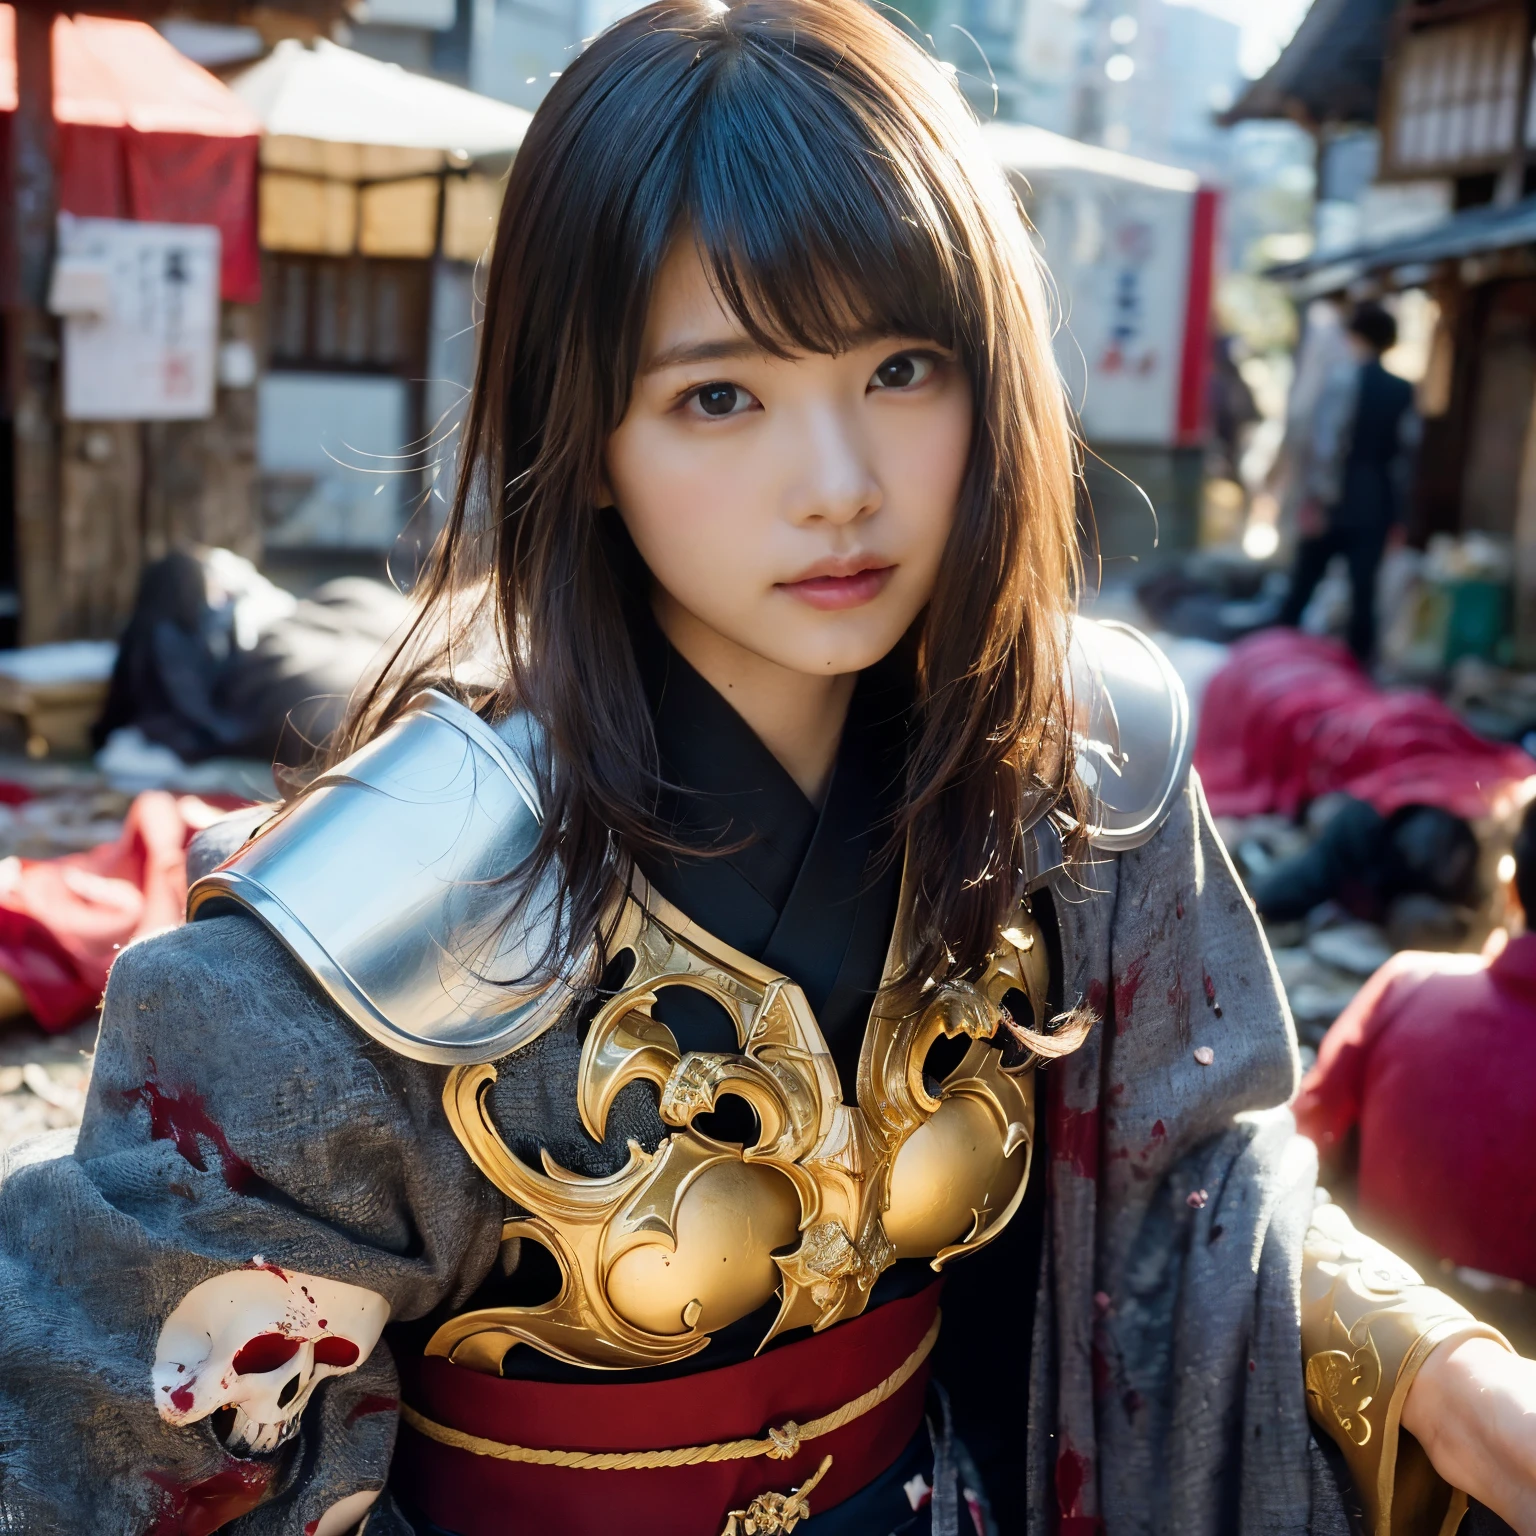 (((Realistic, masterpiece, best quality, crisp detail, high definition, high detail, sharp focus, perfect studio lightning))), 20 years old assassin,((( in the middle of a war, kasumi arimura, fighting stance))), wearing (((fully decorated golden armor, armored kimono, blood scattered face, blood bath, blood shed))), (((fire everywhere, blood everywhere, death everywhere, japan bakumatsu period, dead bodies,carcass,burned,hellish )) traditional village background)